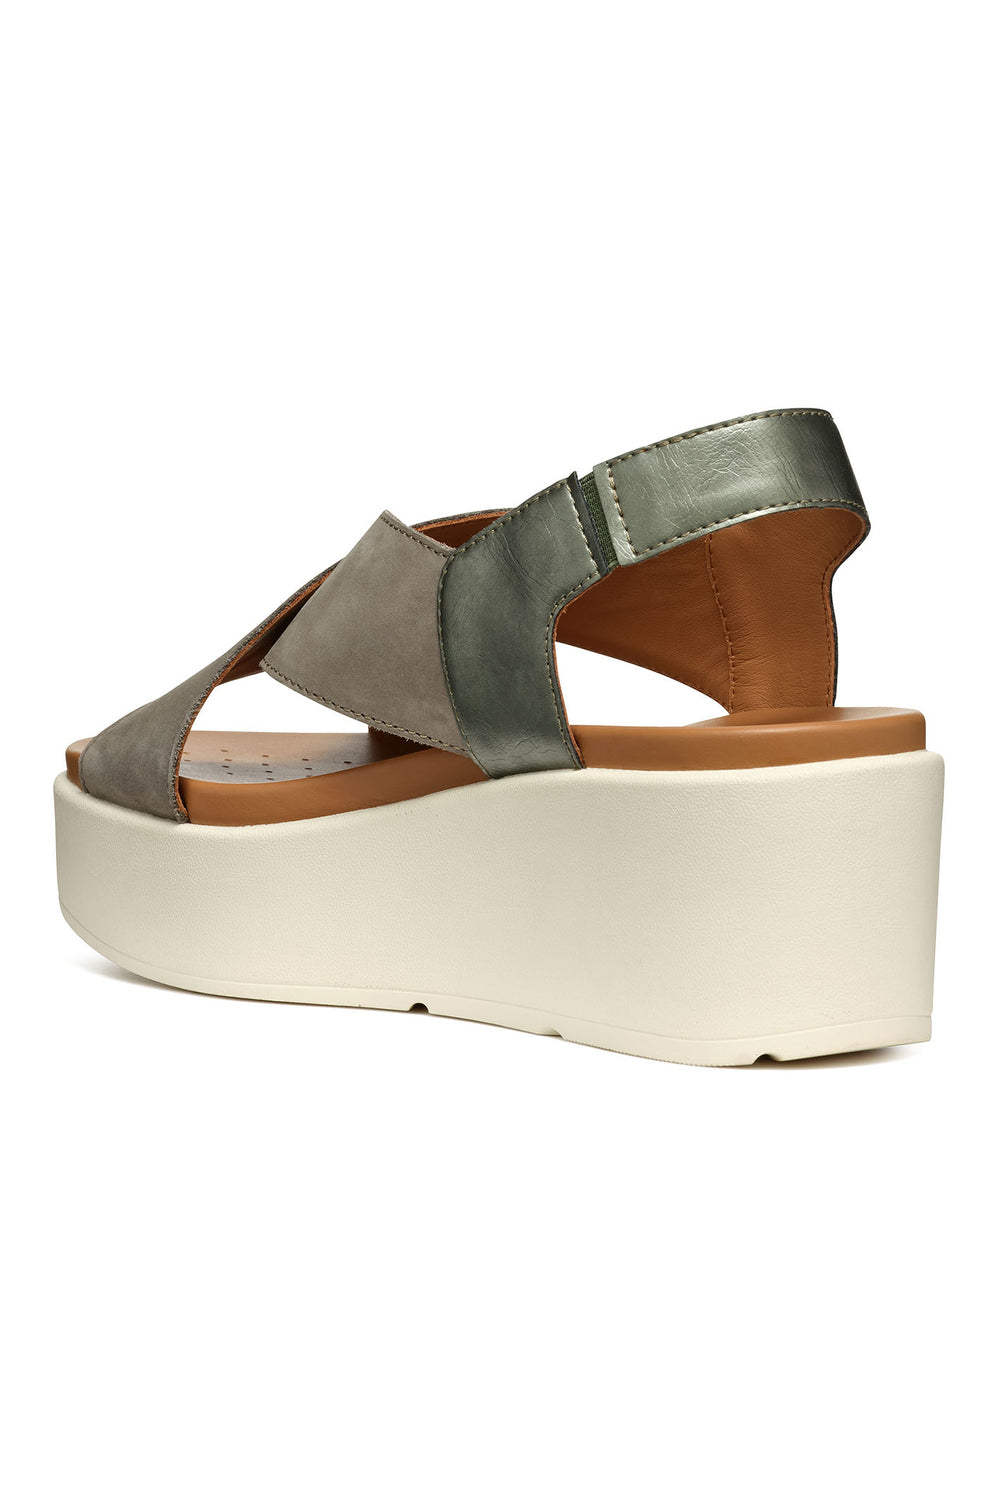 Geox Xand 2.2s Sage Green Wedge Sandal - Dotique